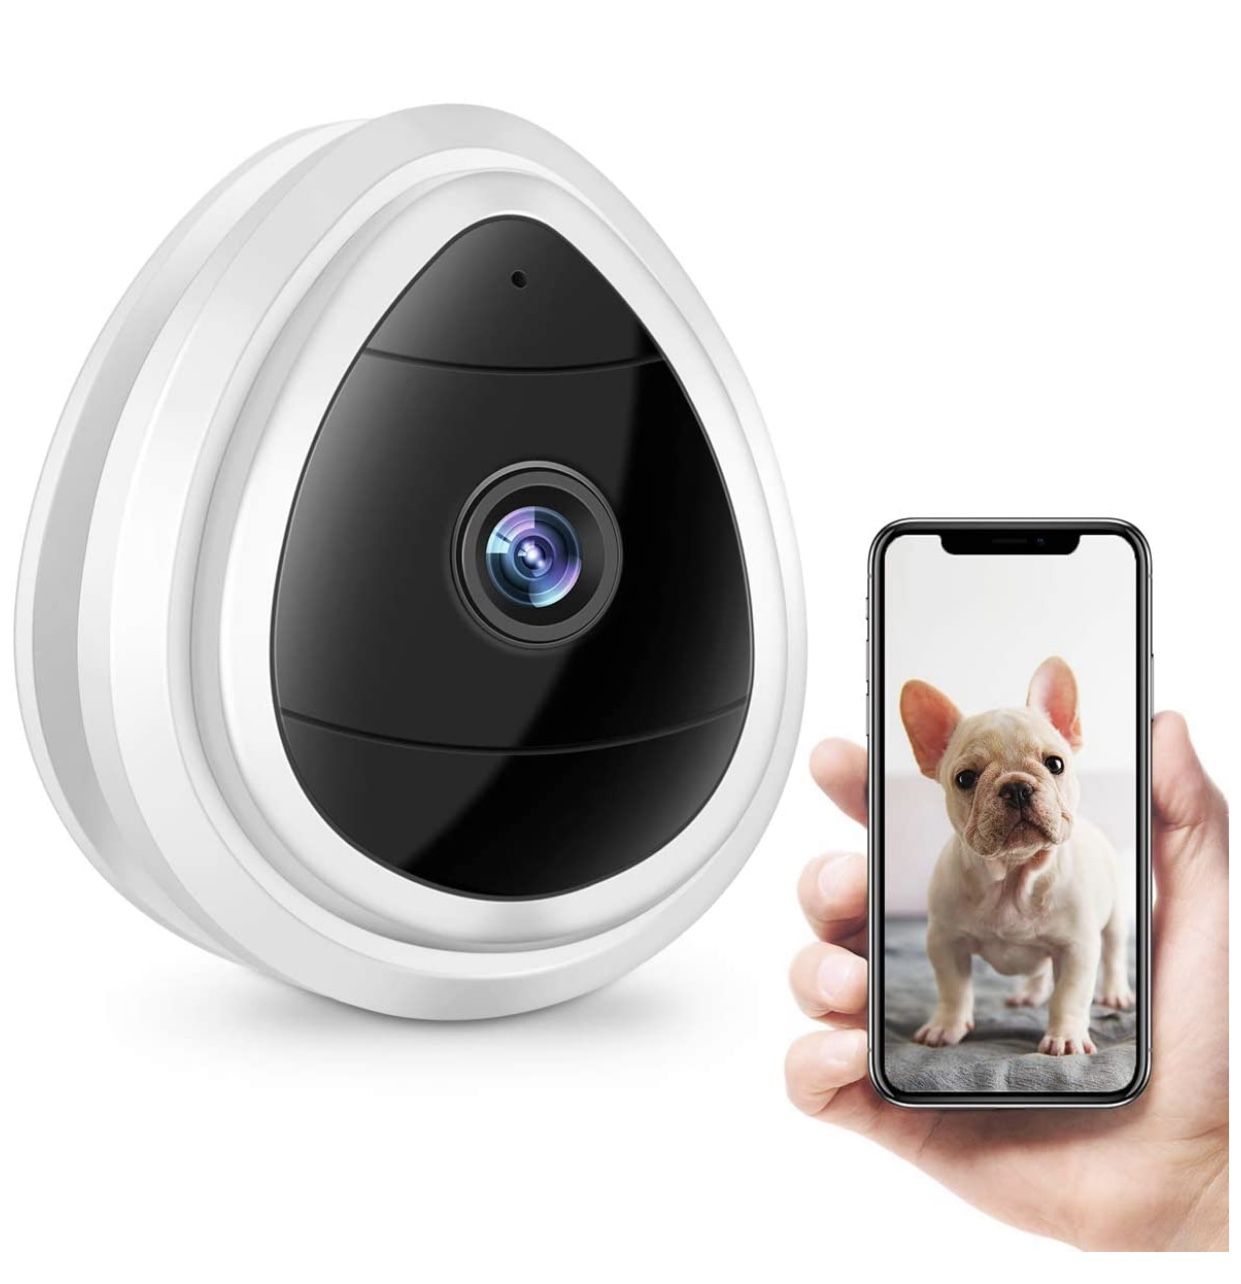 Wireless Security Camera, Full HD Pet Monitor Camera, WiFi Indoor IP Surveillance Camera with Motion Detection, Two Way Audio Vision, Home Baby Camera